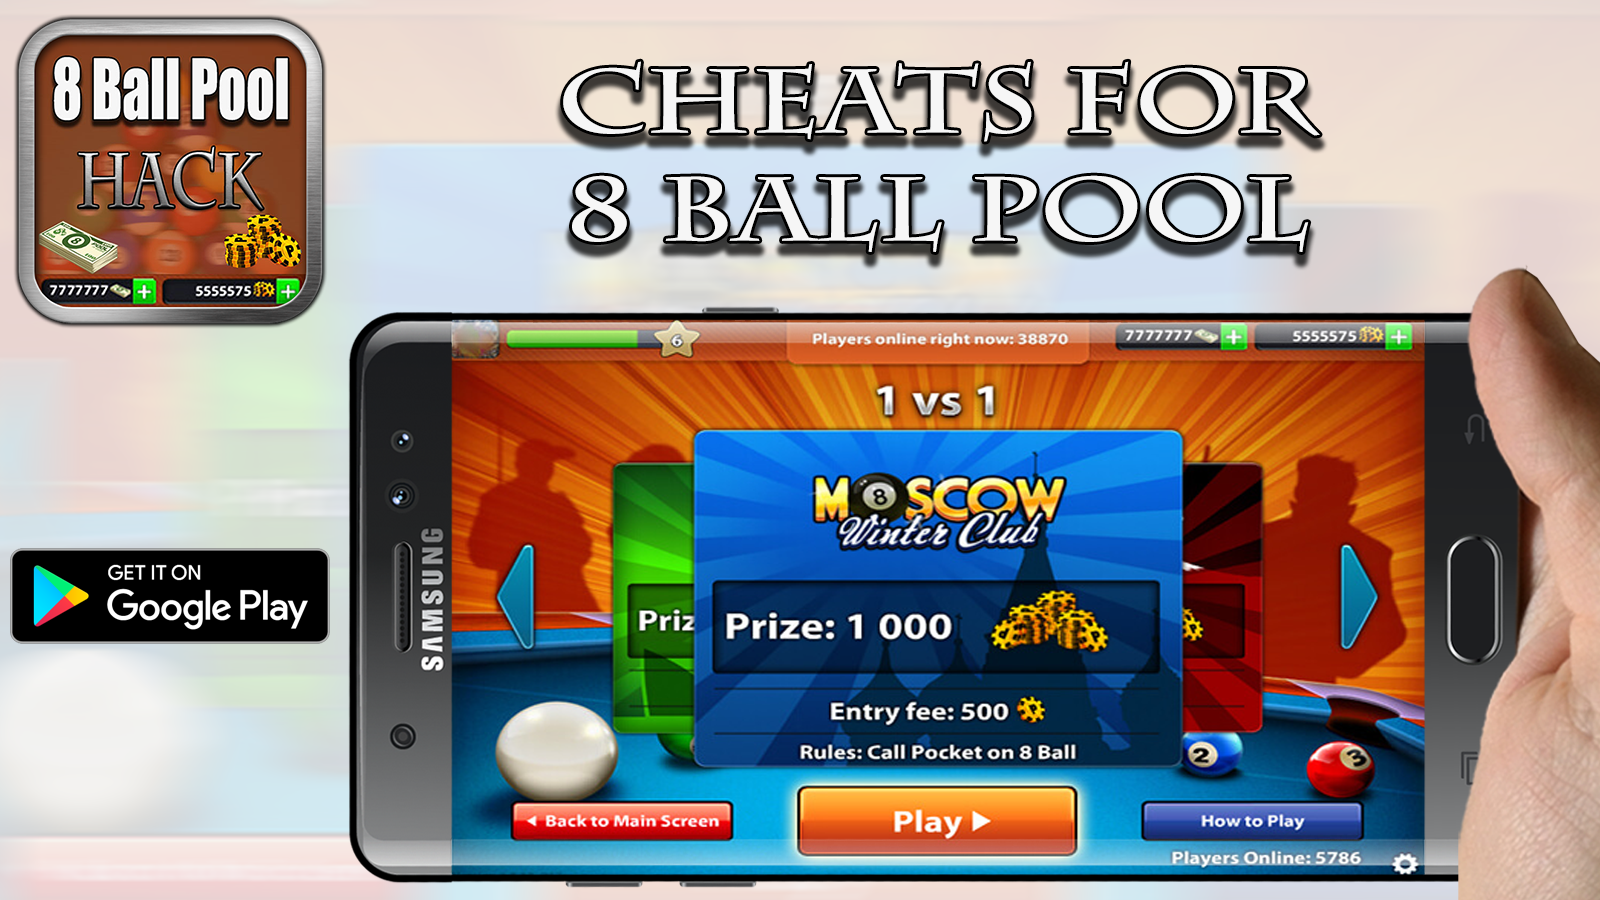 Hack For 8 Ball Pool !-Prank-! for Android - APK Download - 